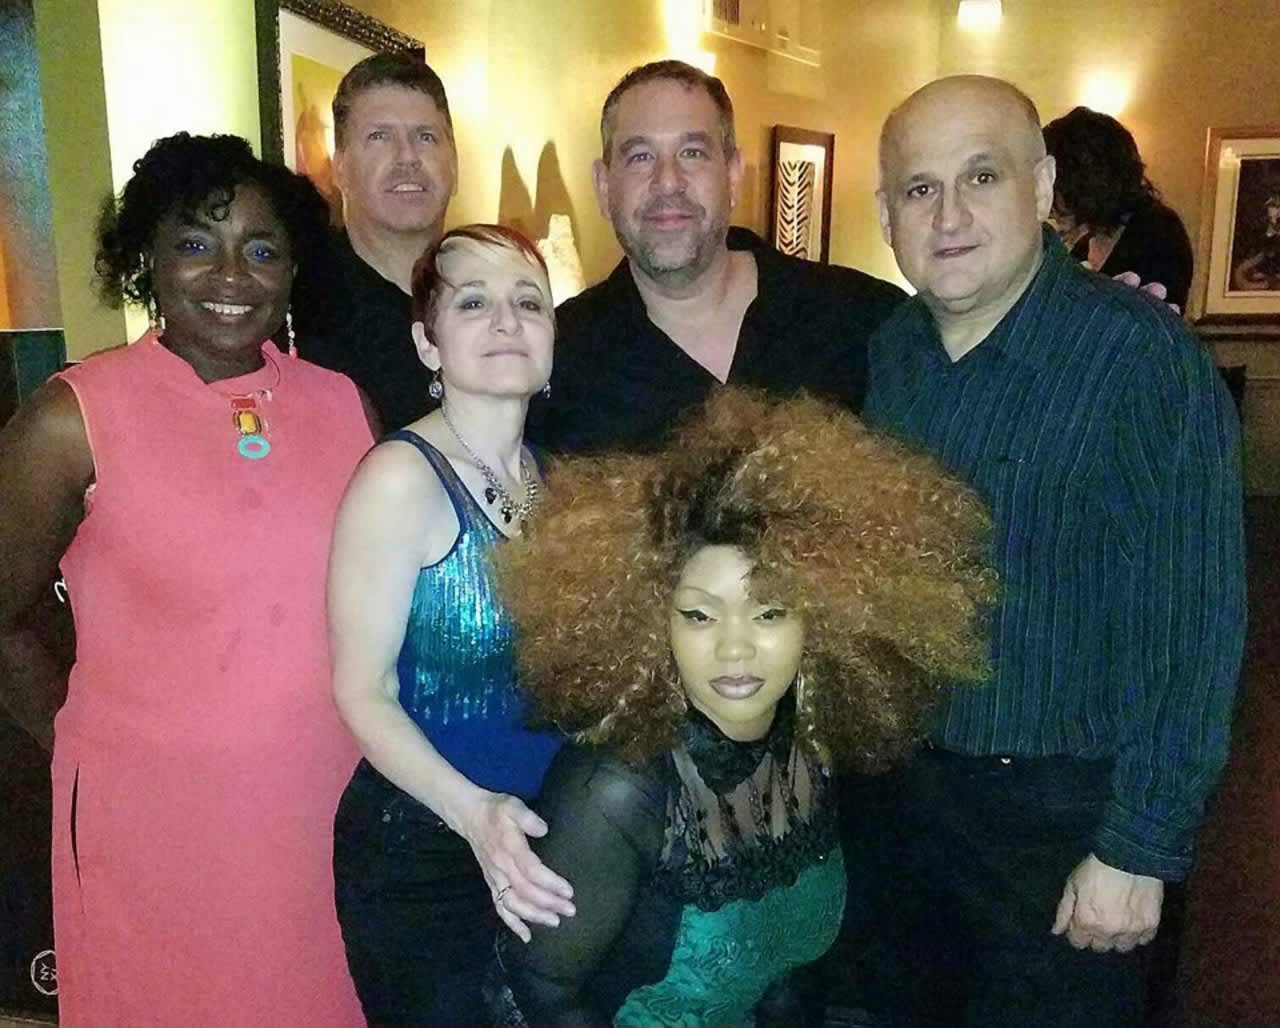 Soul Groove performs in Demarest on July 27.